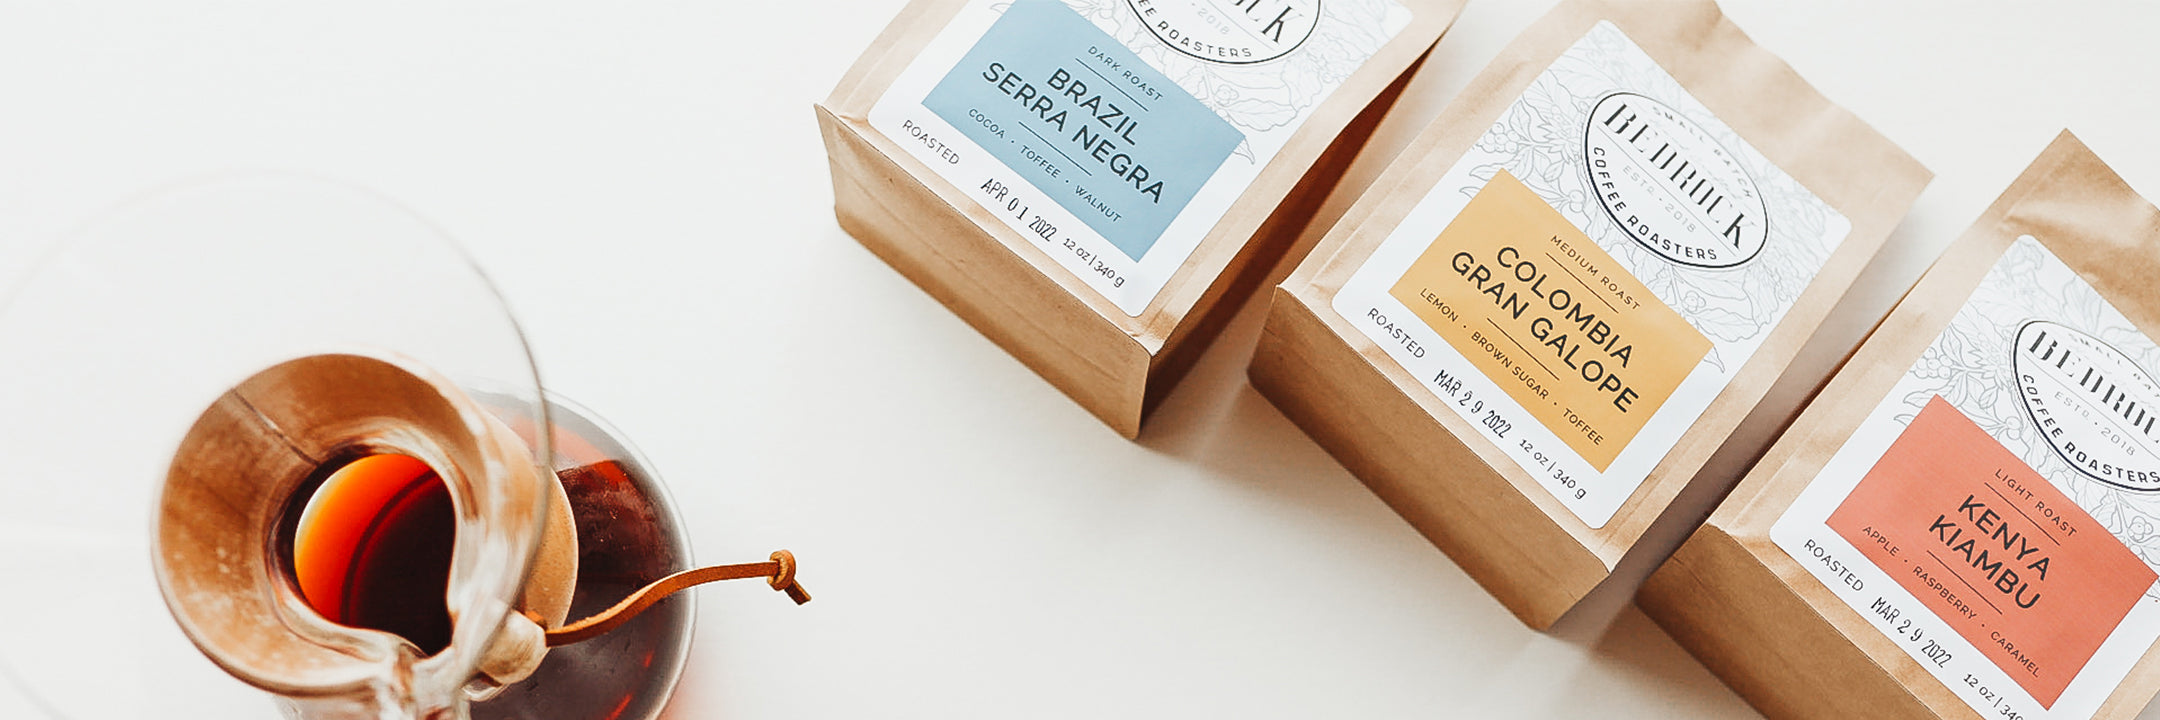 Coffee bags with chemex